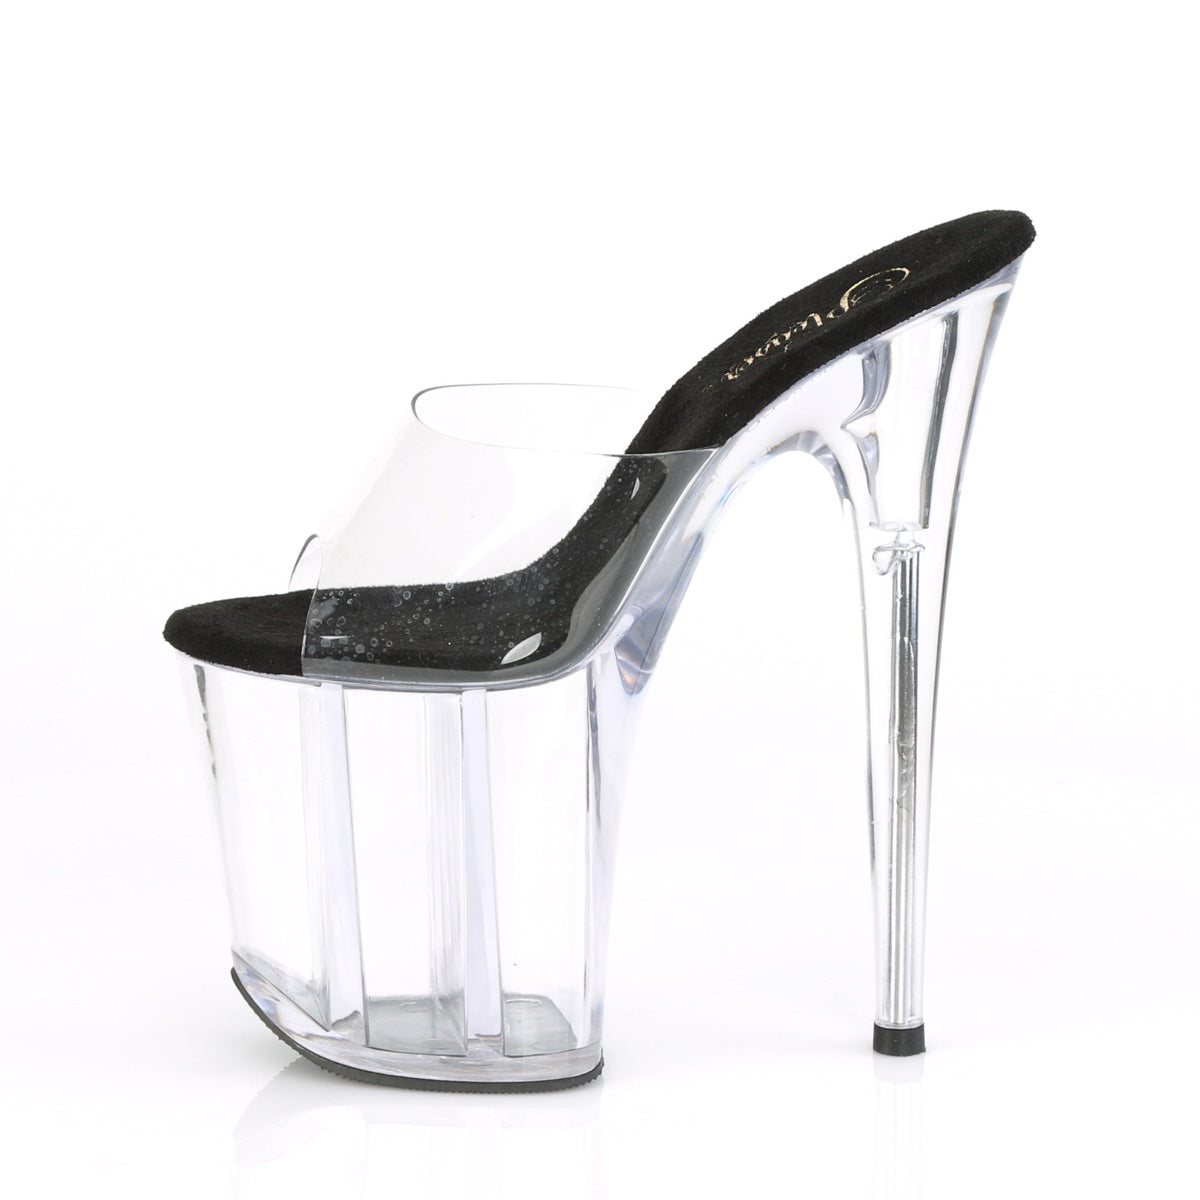 FLAMINGO-801 8" Heel Clear and Black Pole Dancing -Pleaser- Sexy Shoes Pole Dance Heels